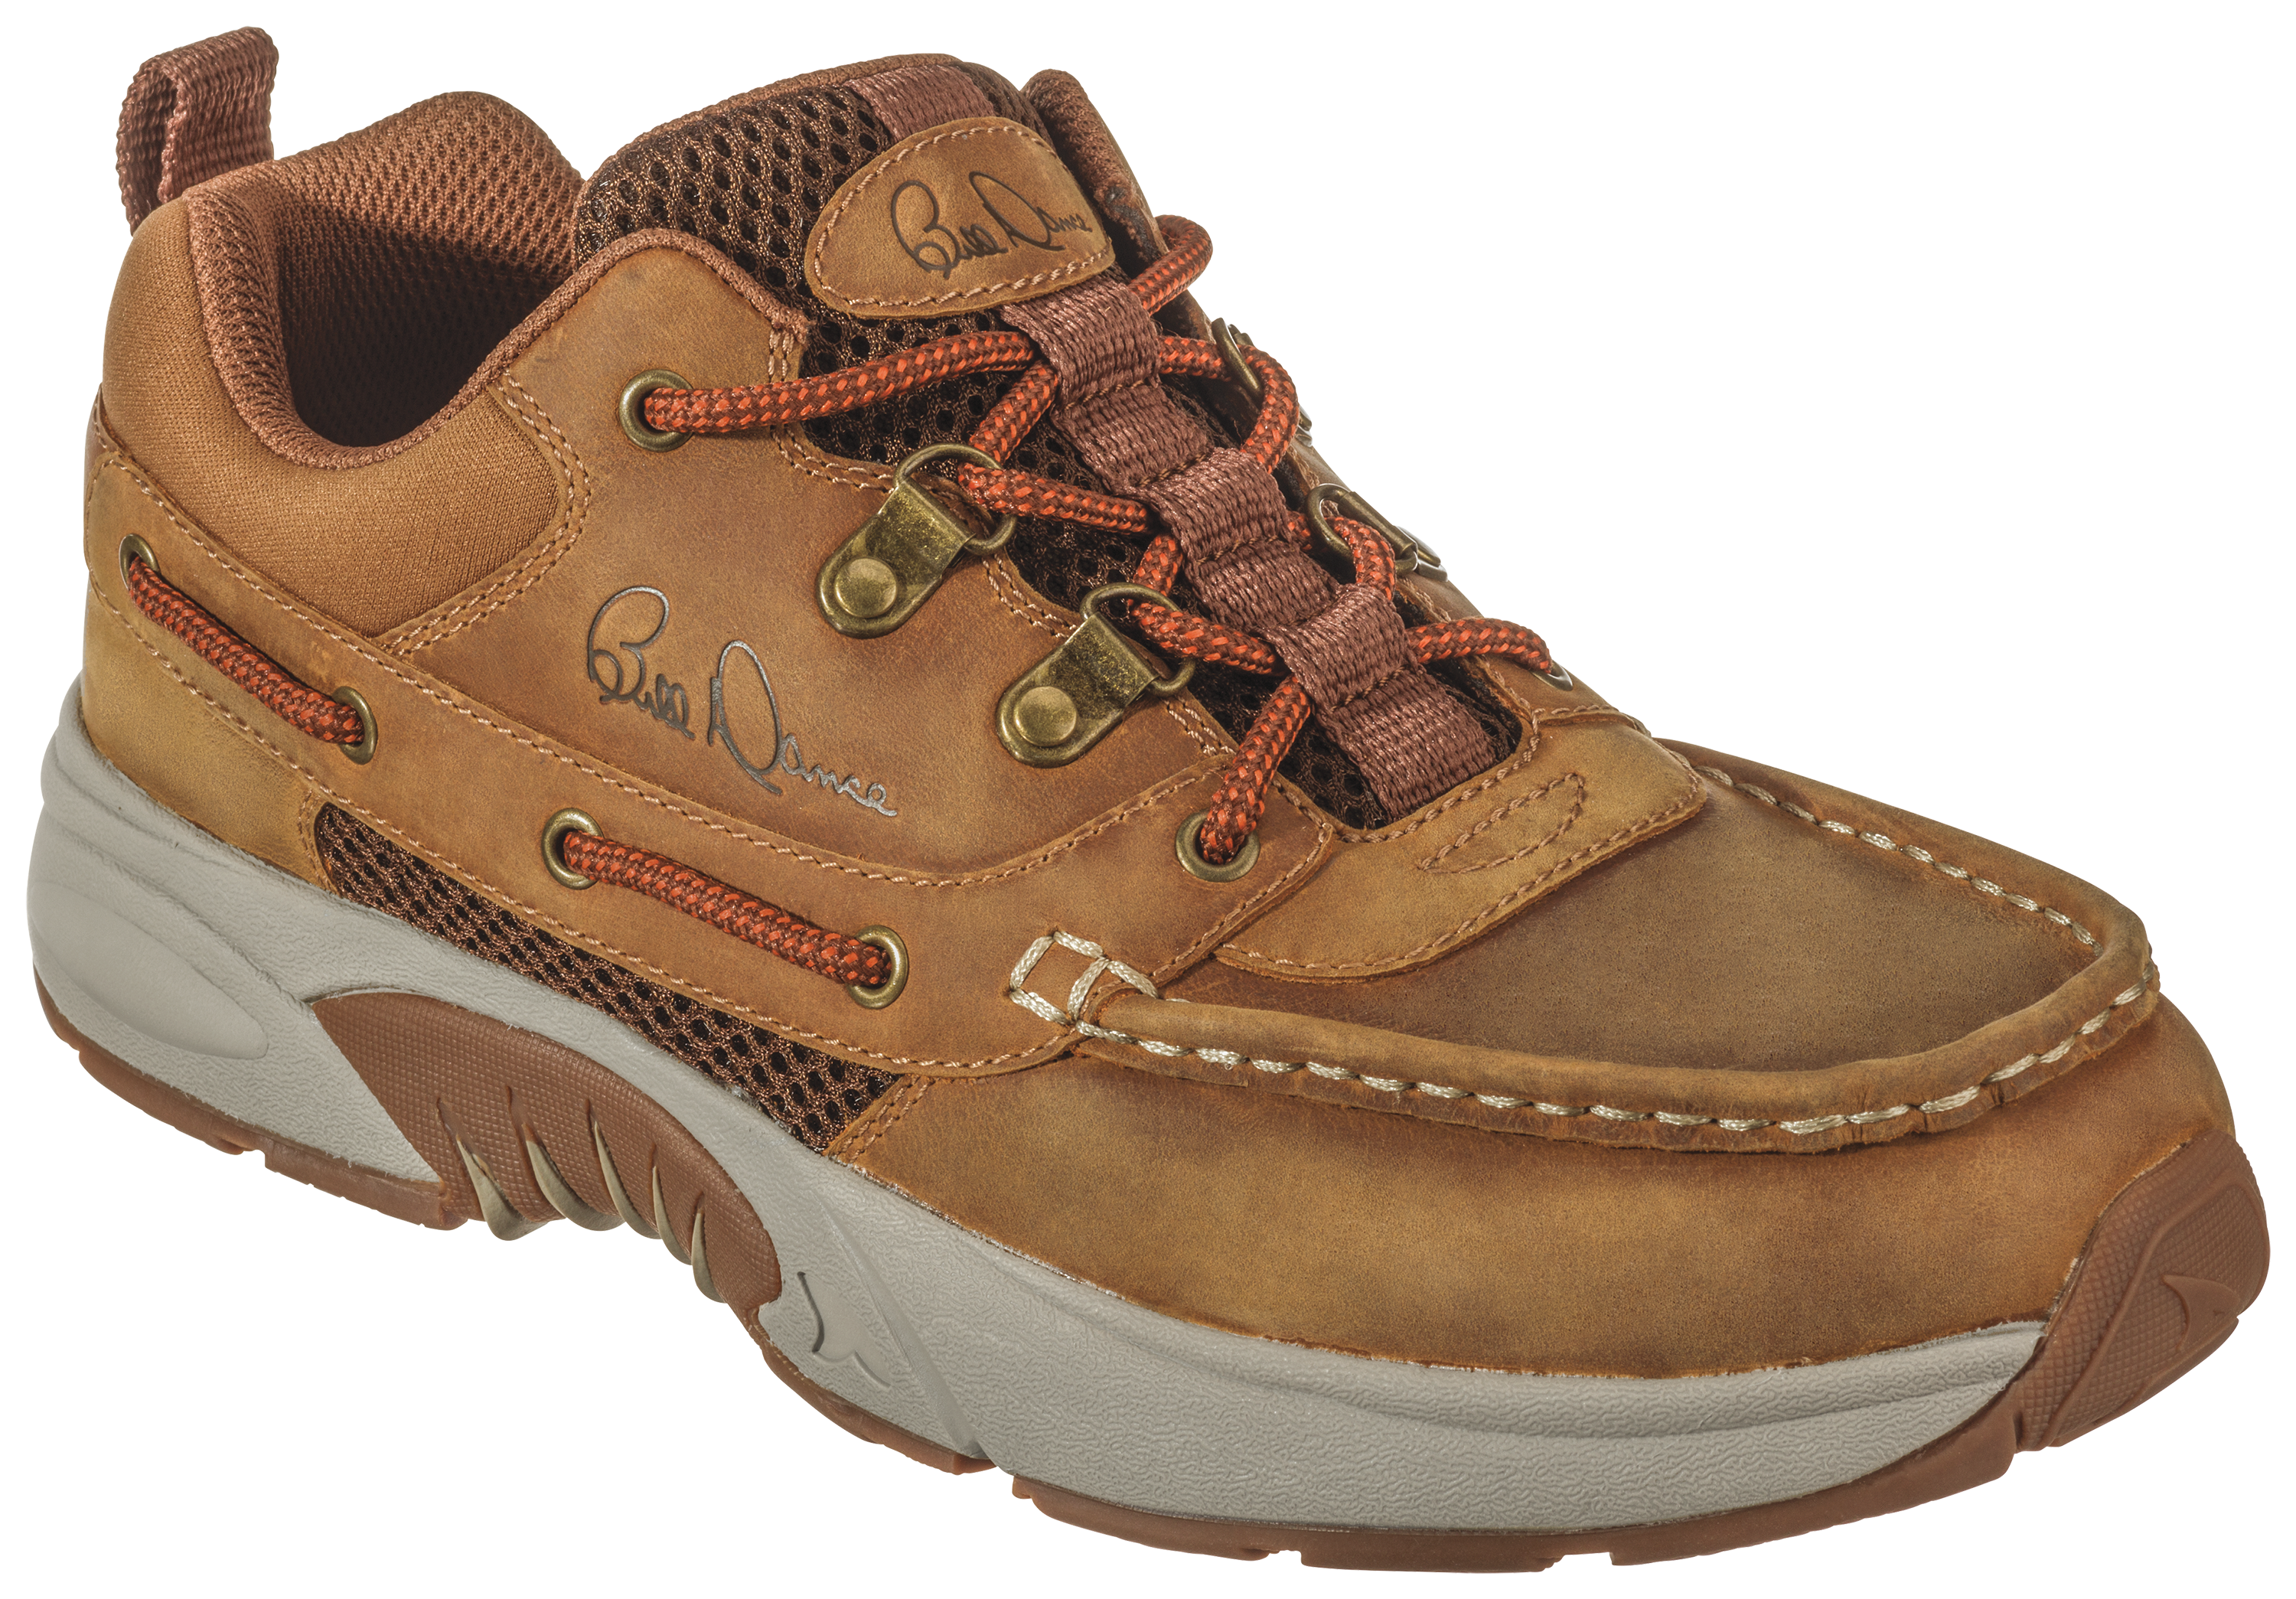 Bill Dance Pro Performance Fishing Shoes for Men by Rugged Shark - Brown - 8M